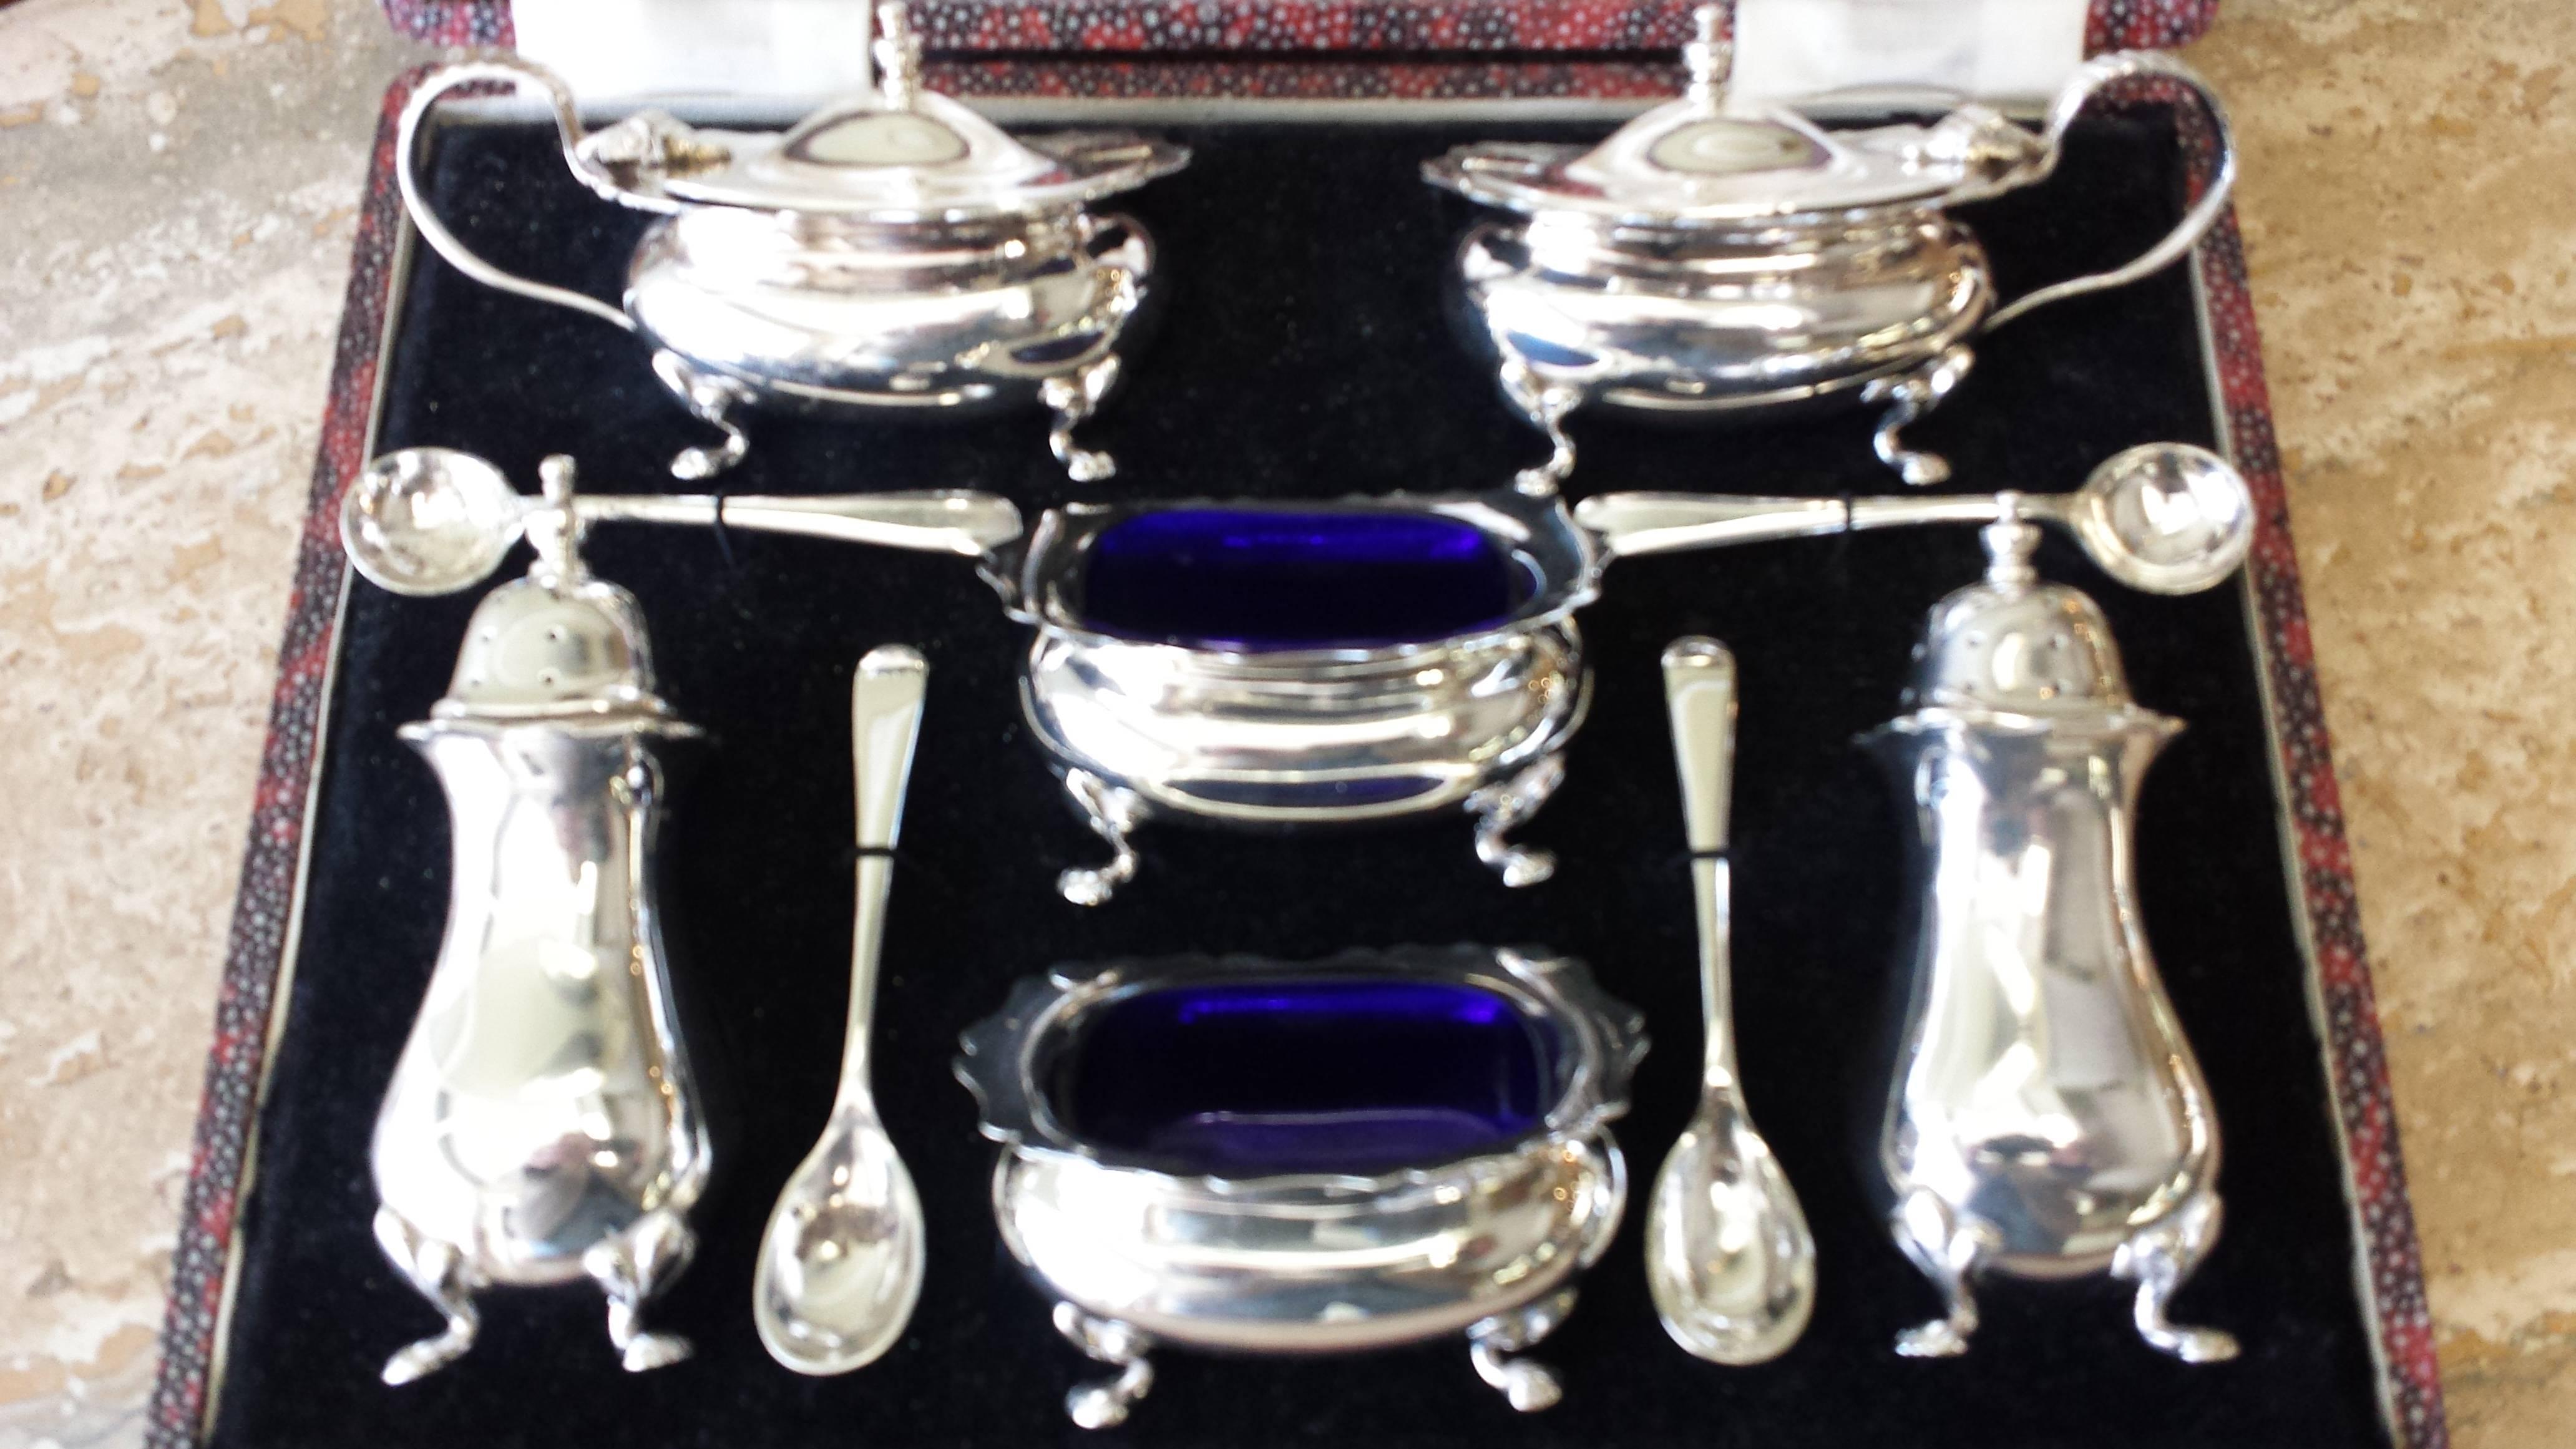 Walker & Hall, Sheffield, England, silver plate condiment set, circa 1930s, in a presentation box. The set has two pepper pots, two open salts, two condiment lidded pots and four spoons. The open salts and condiment pots are fitted with blue